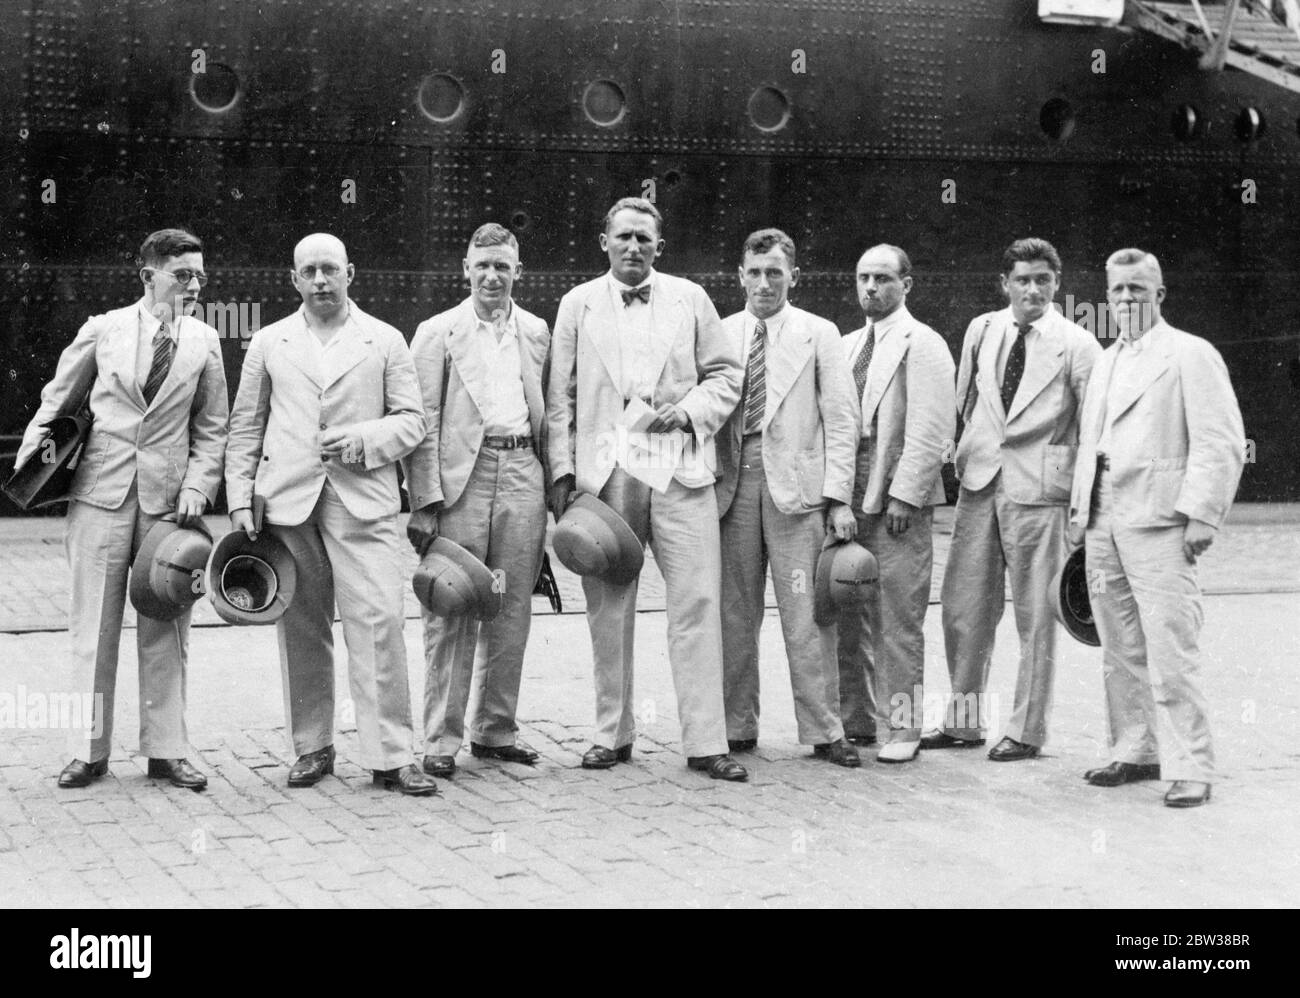 German Himalayan Expedition in Bombay . 9 May 1934 Nine mountaineers (8 shown) were: Peter Aschenbrenner of Kufstein, Fritz Bechtold of Trostberg, Willi Bernard, the doctor of the expedition, from Hall, Alfred Drexel and Willy Merkl from Munich, Peter Miillritter from Trostberg, Erwin Schneider from Hall, Willi Welzenbach from Munich, and Uli Wieland from Ulm. The scientific group consisted of the cartographer Richard Finster- walder from Hannover, the geographer Walter Raechl from Munich, and the geologist Peter Misch from Gottingen. Stock Photo